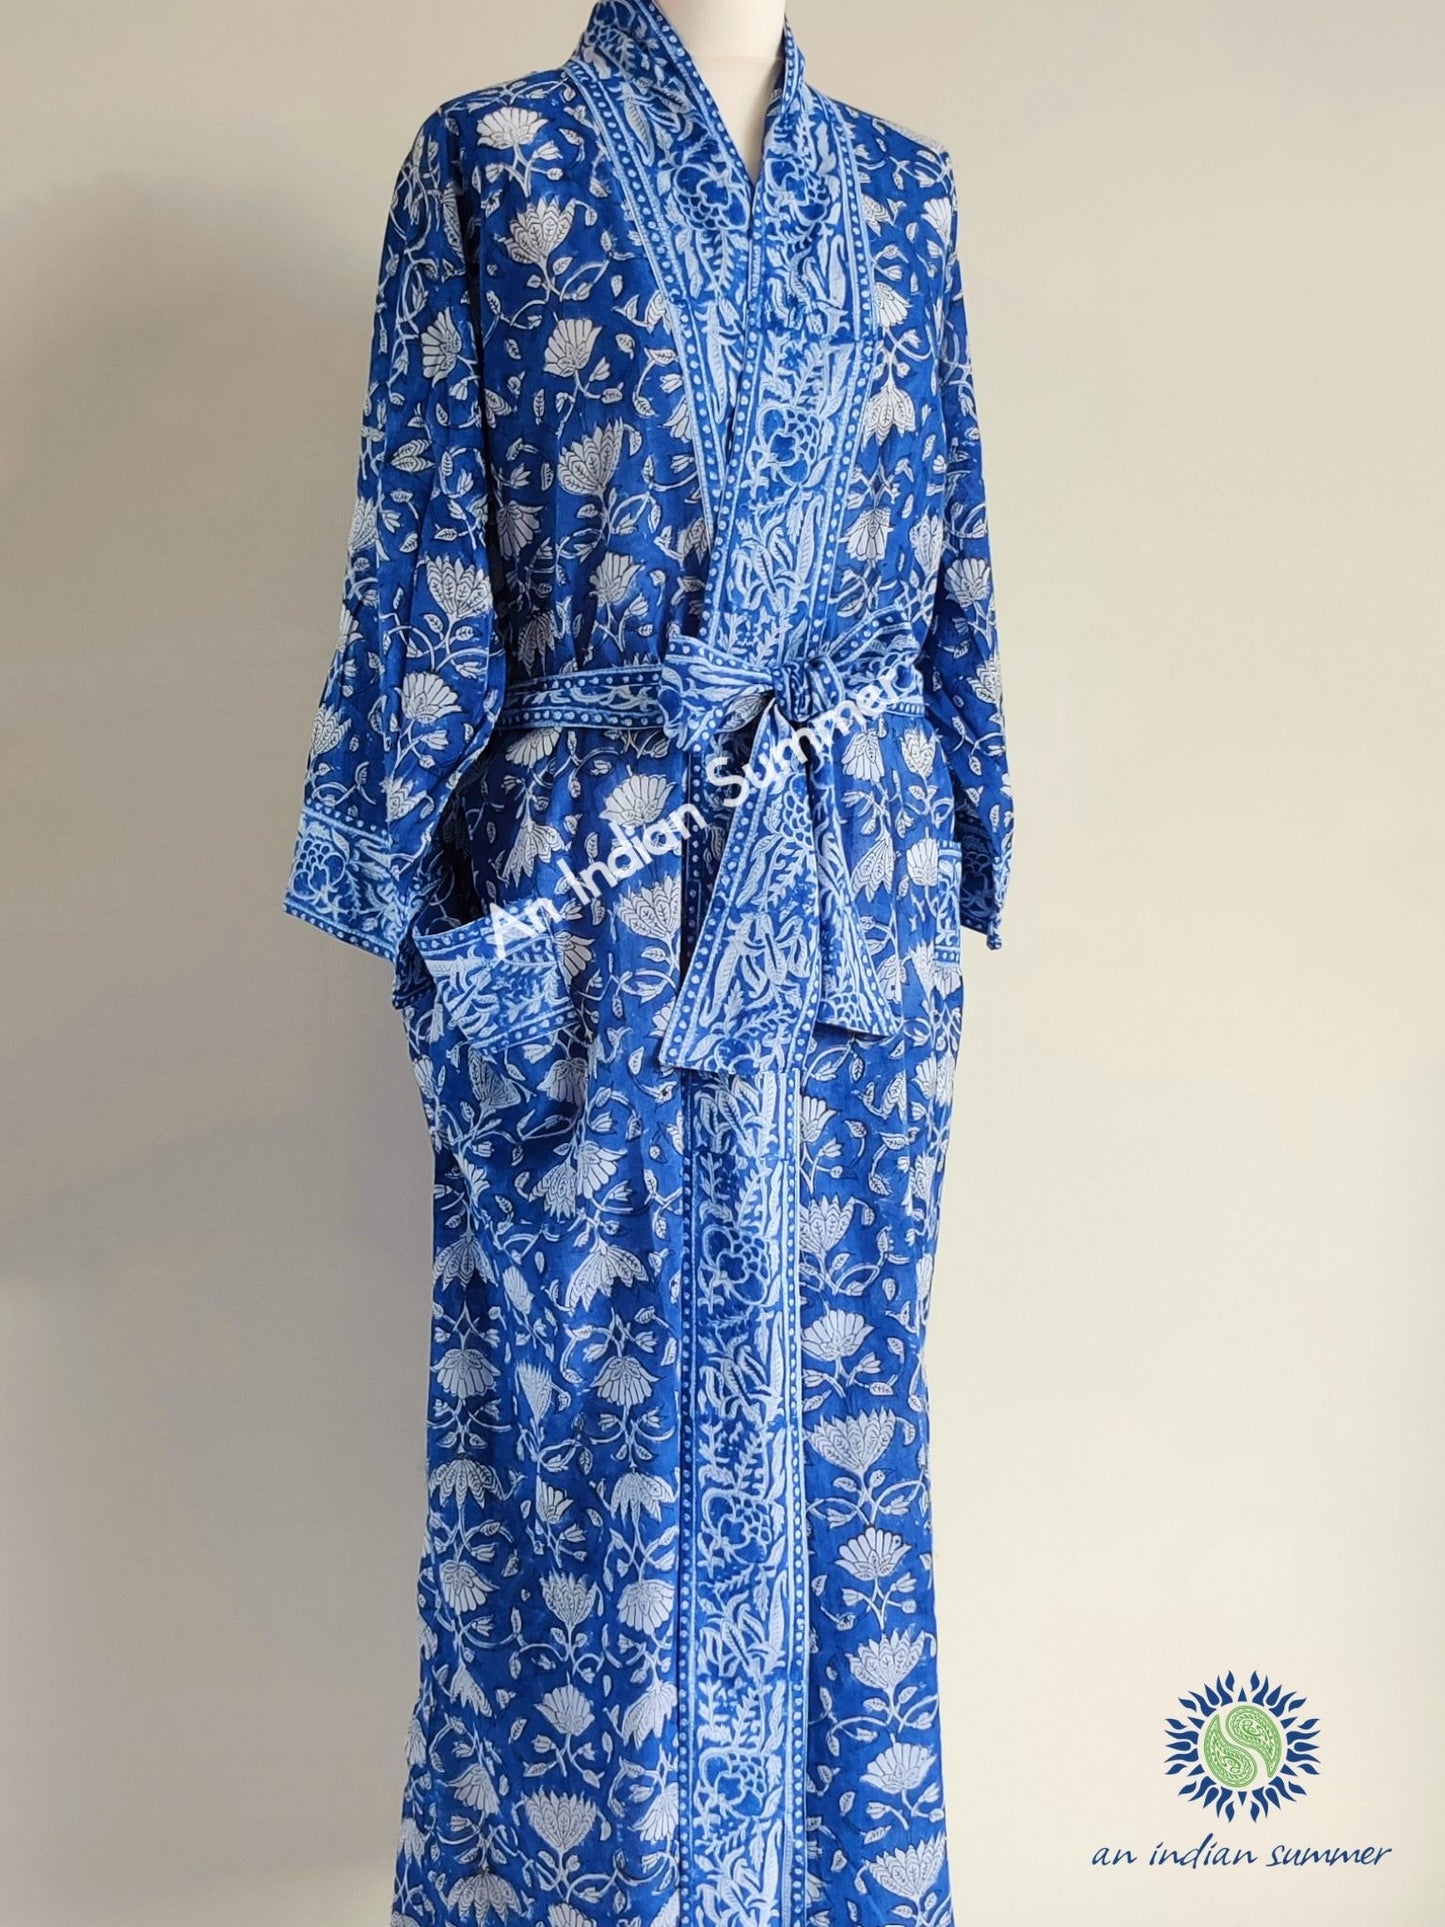 Long Kimono Robe | Lotus | Blue | Floral Block Print | Hand Block Printed | Cotton Voile | An Indian Summer | Seasonless Timeless Sustainable Ethical Authentic Artisan Conscious Clothing Lifestyle Brand